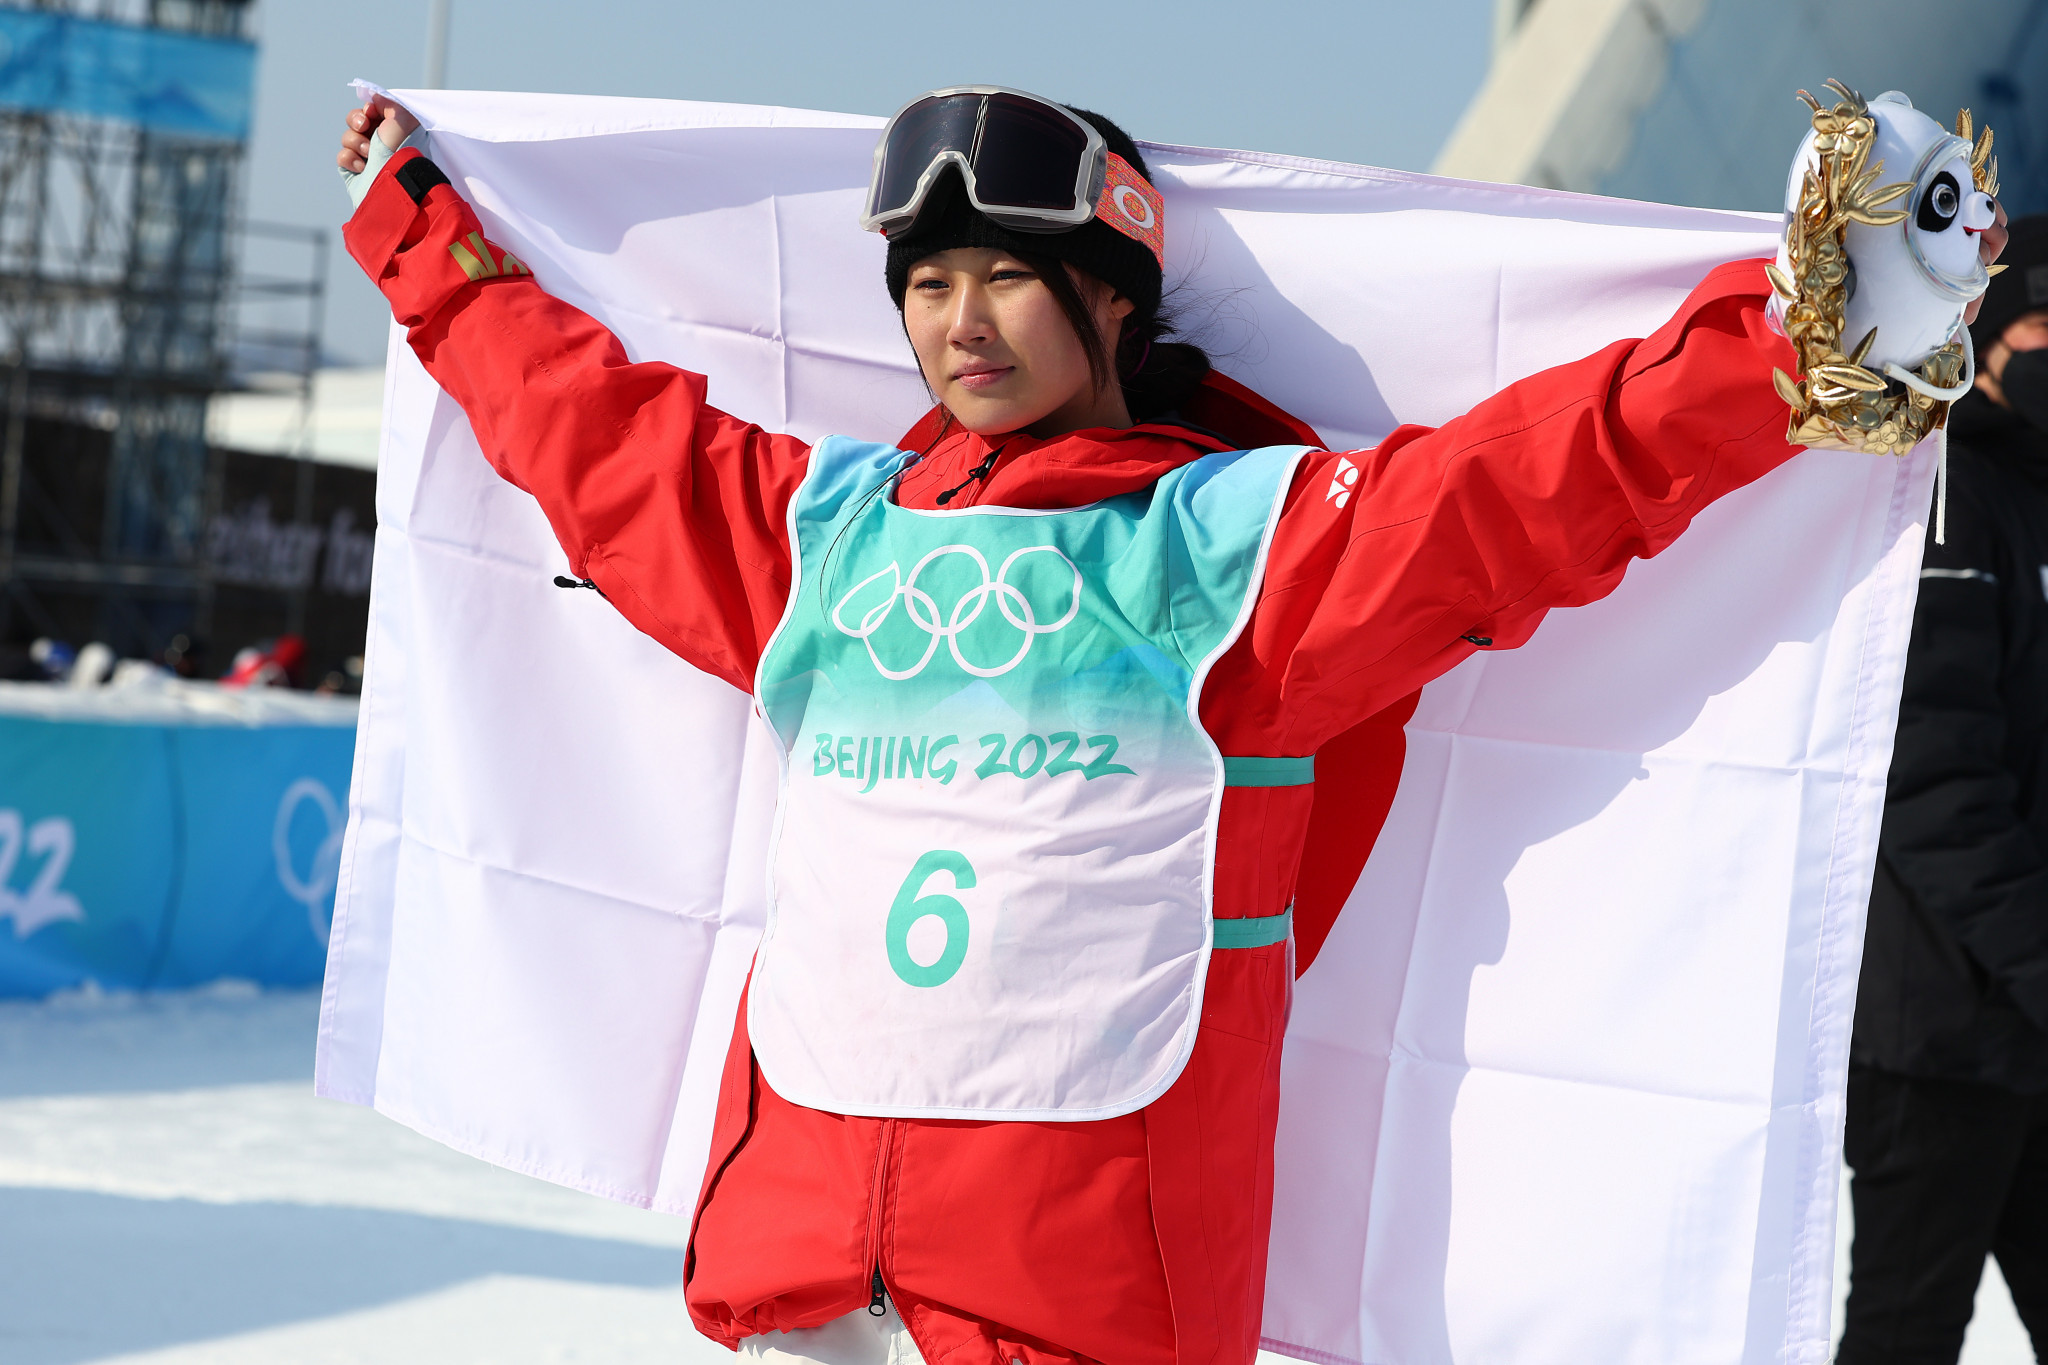 Kokomo Murase topped women's slopestyle qualification at the Snowboard World Cup in Špindlerův Mlýn ©Getty Images